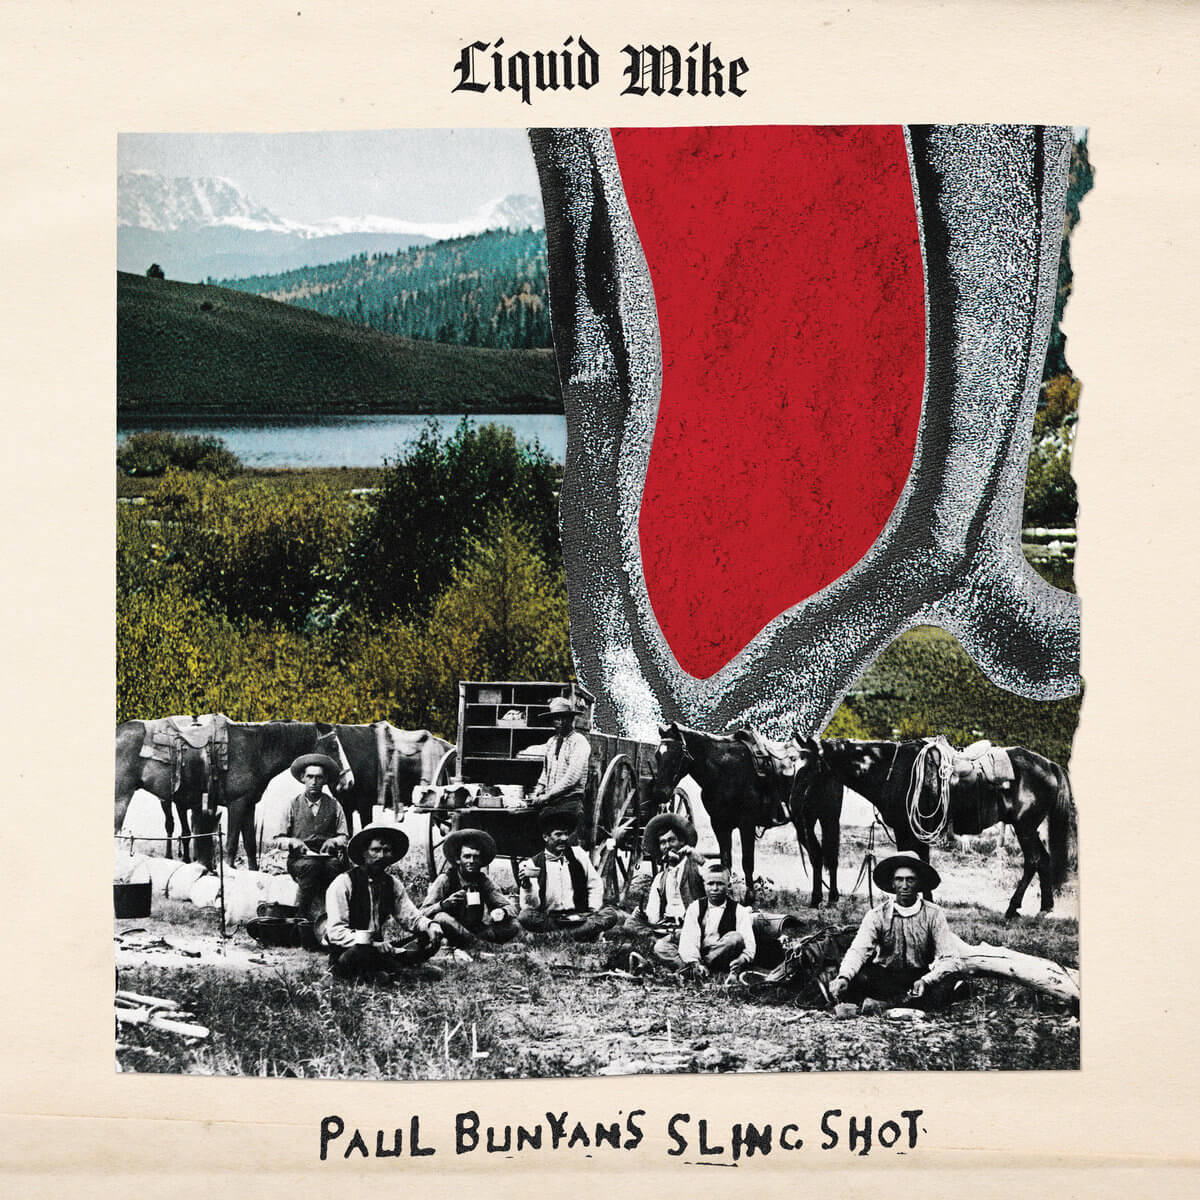 Paul Bunyan's Sling Shot by Liquid Mike album review by Greg Walker for Northern Transmissions